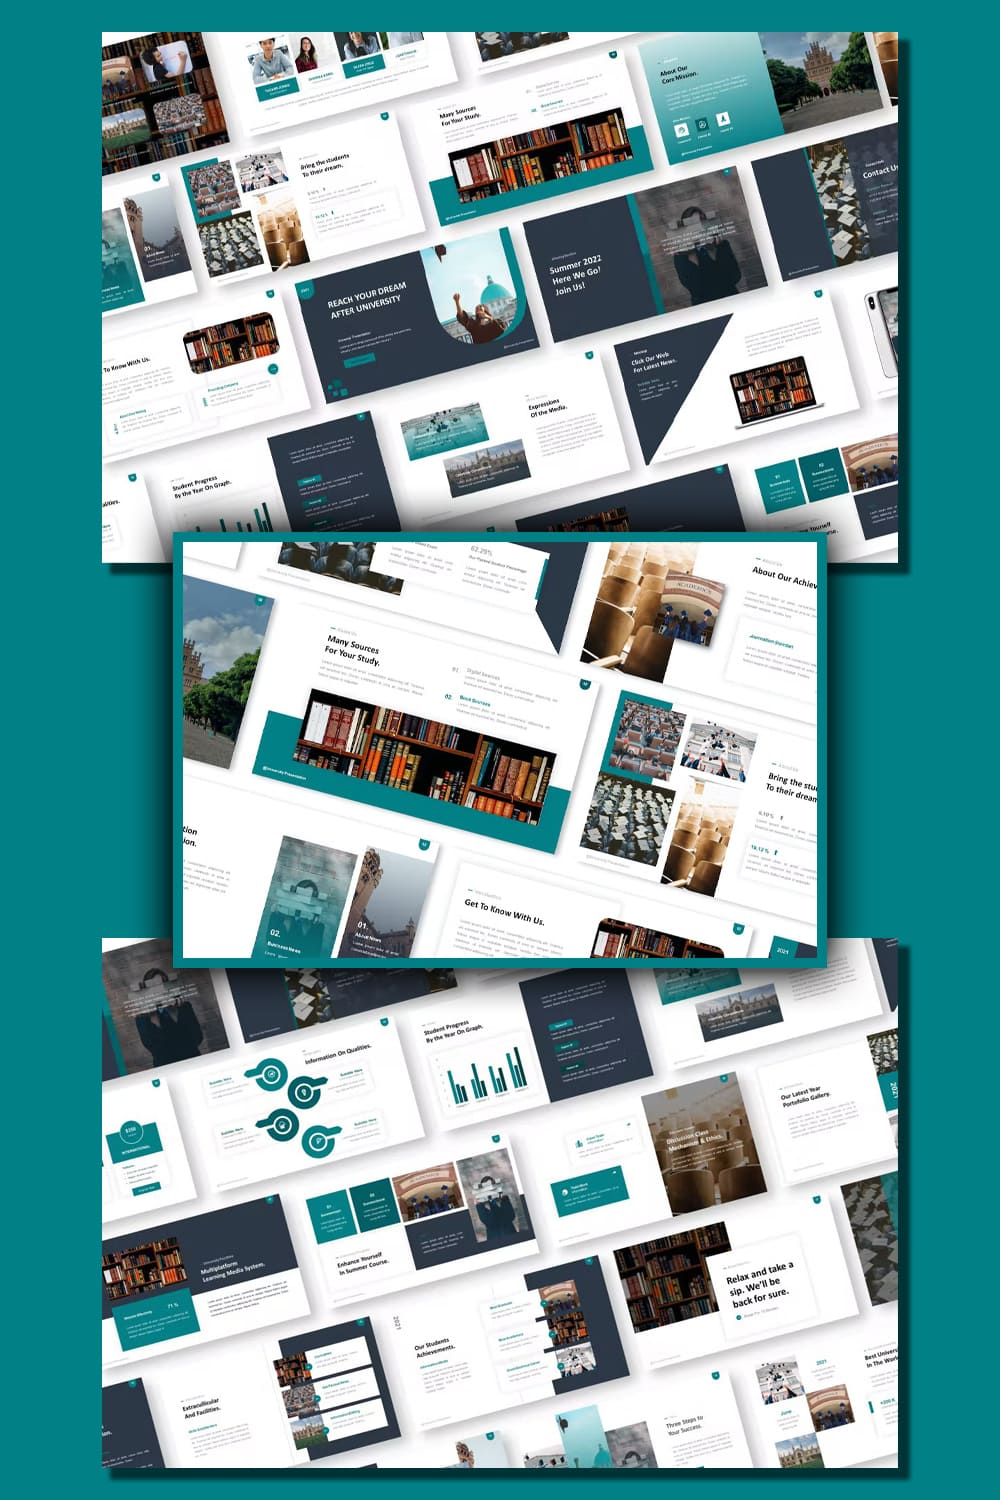 University powerpoint presentation template, picture for pinterest 1000x1500.